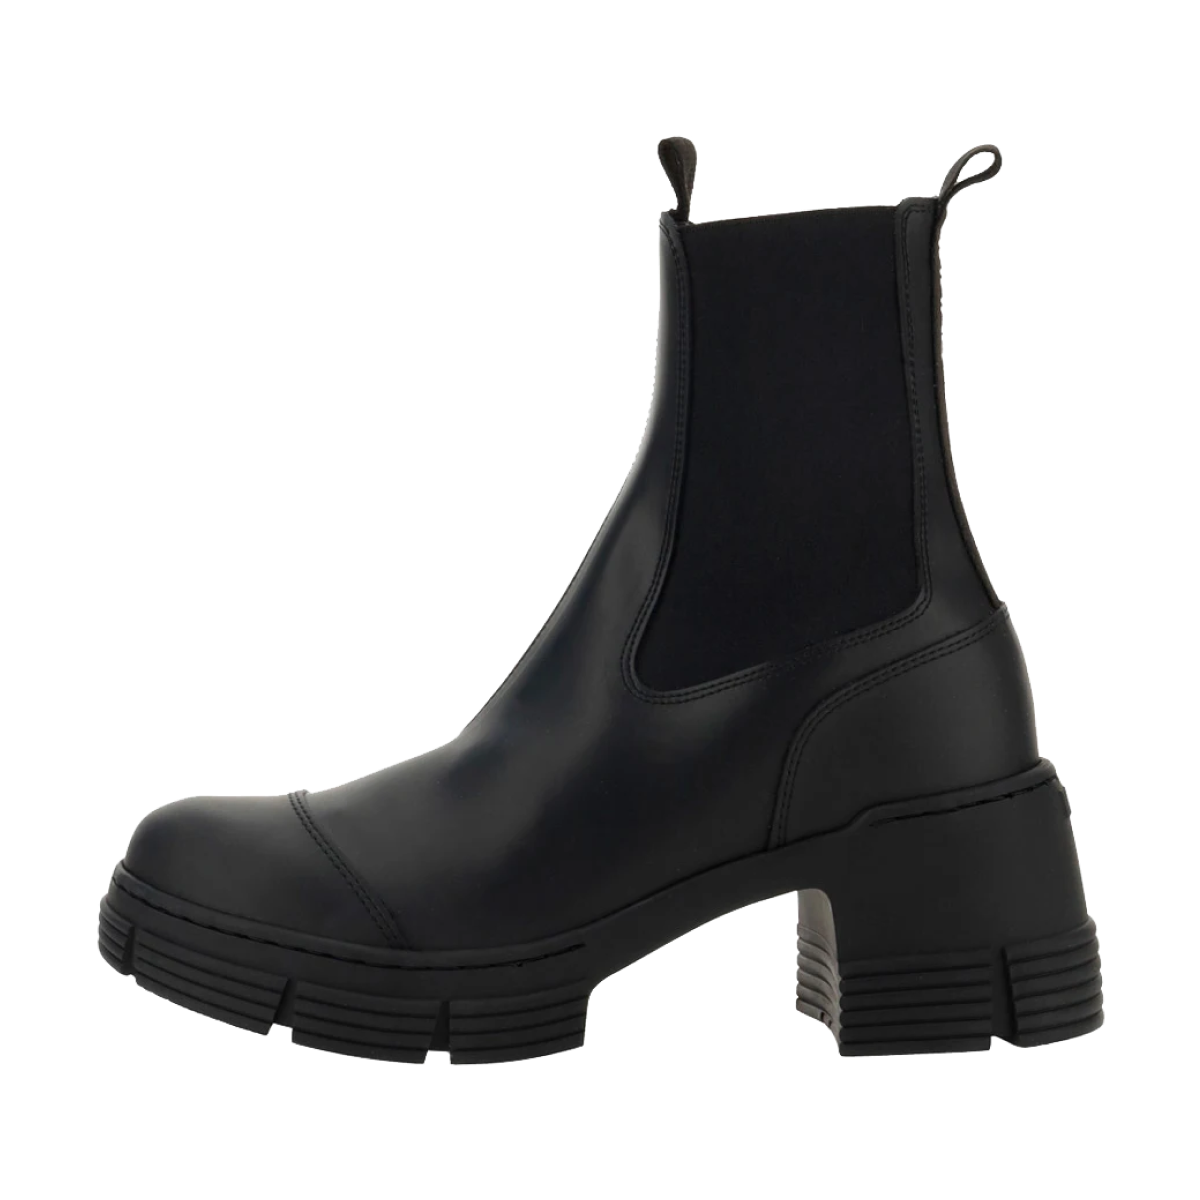 A pair of black heeled rubber boots from Ganni